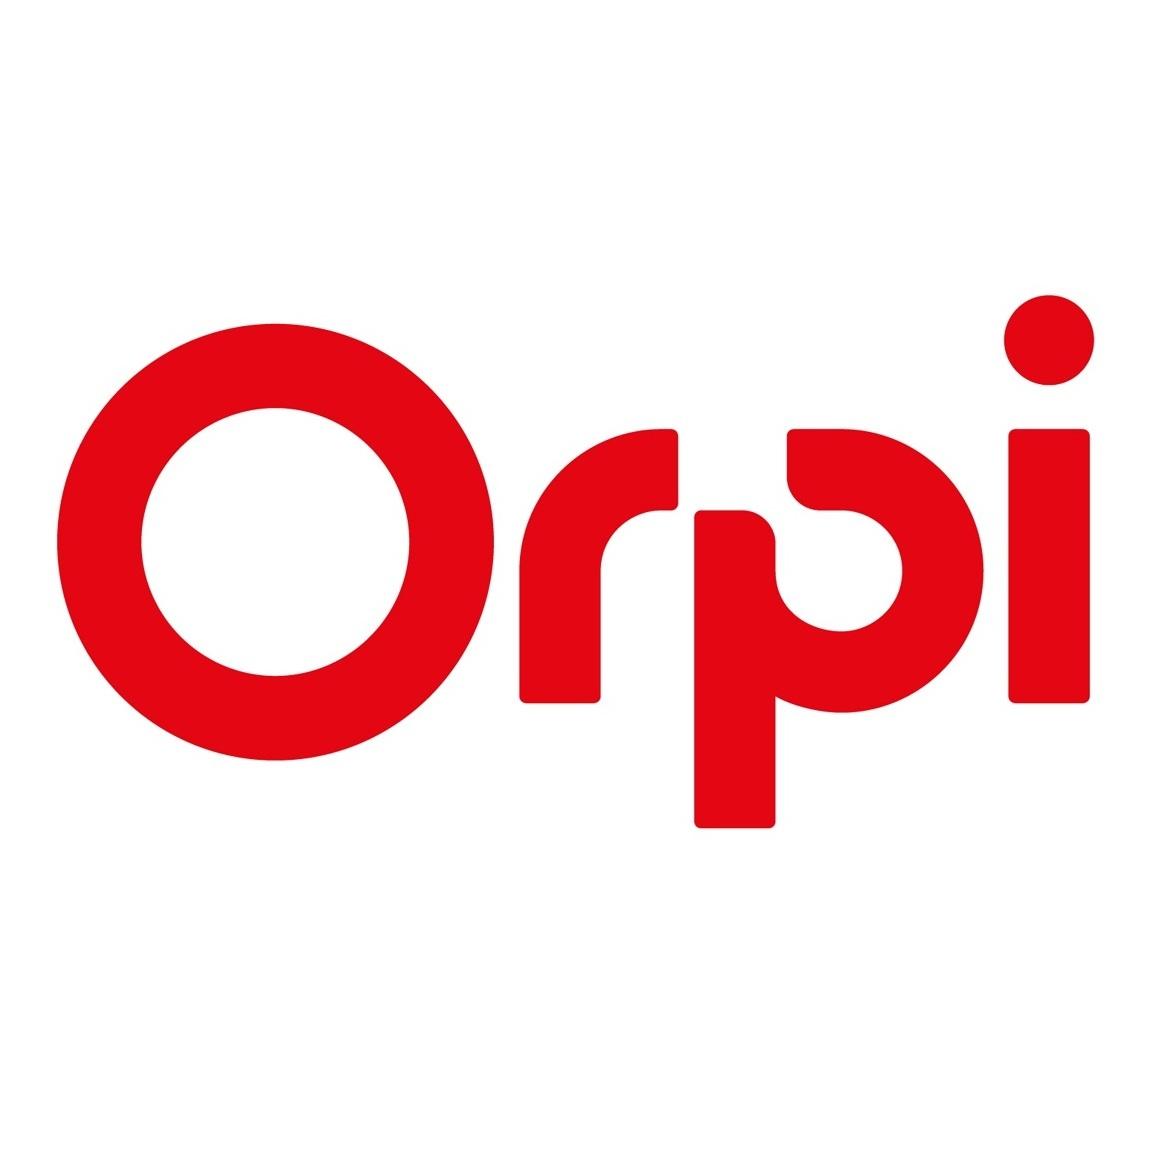 Orpi Duo Transactions Immobilier Romainville Romainville